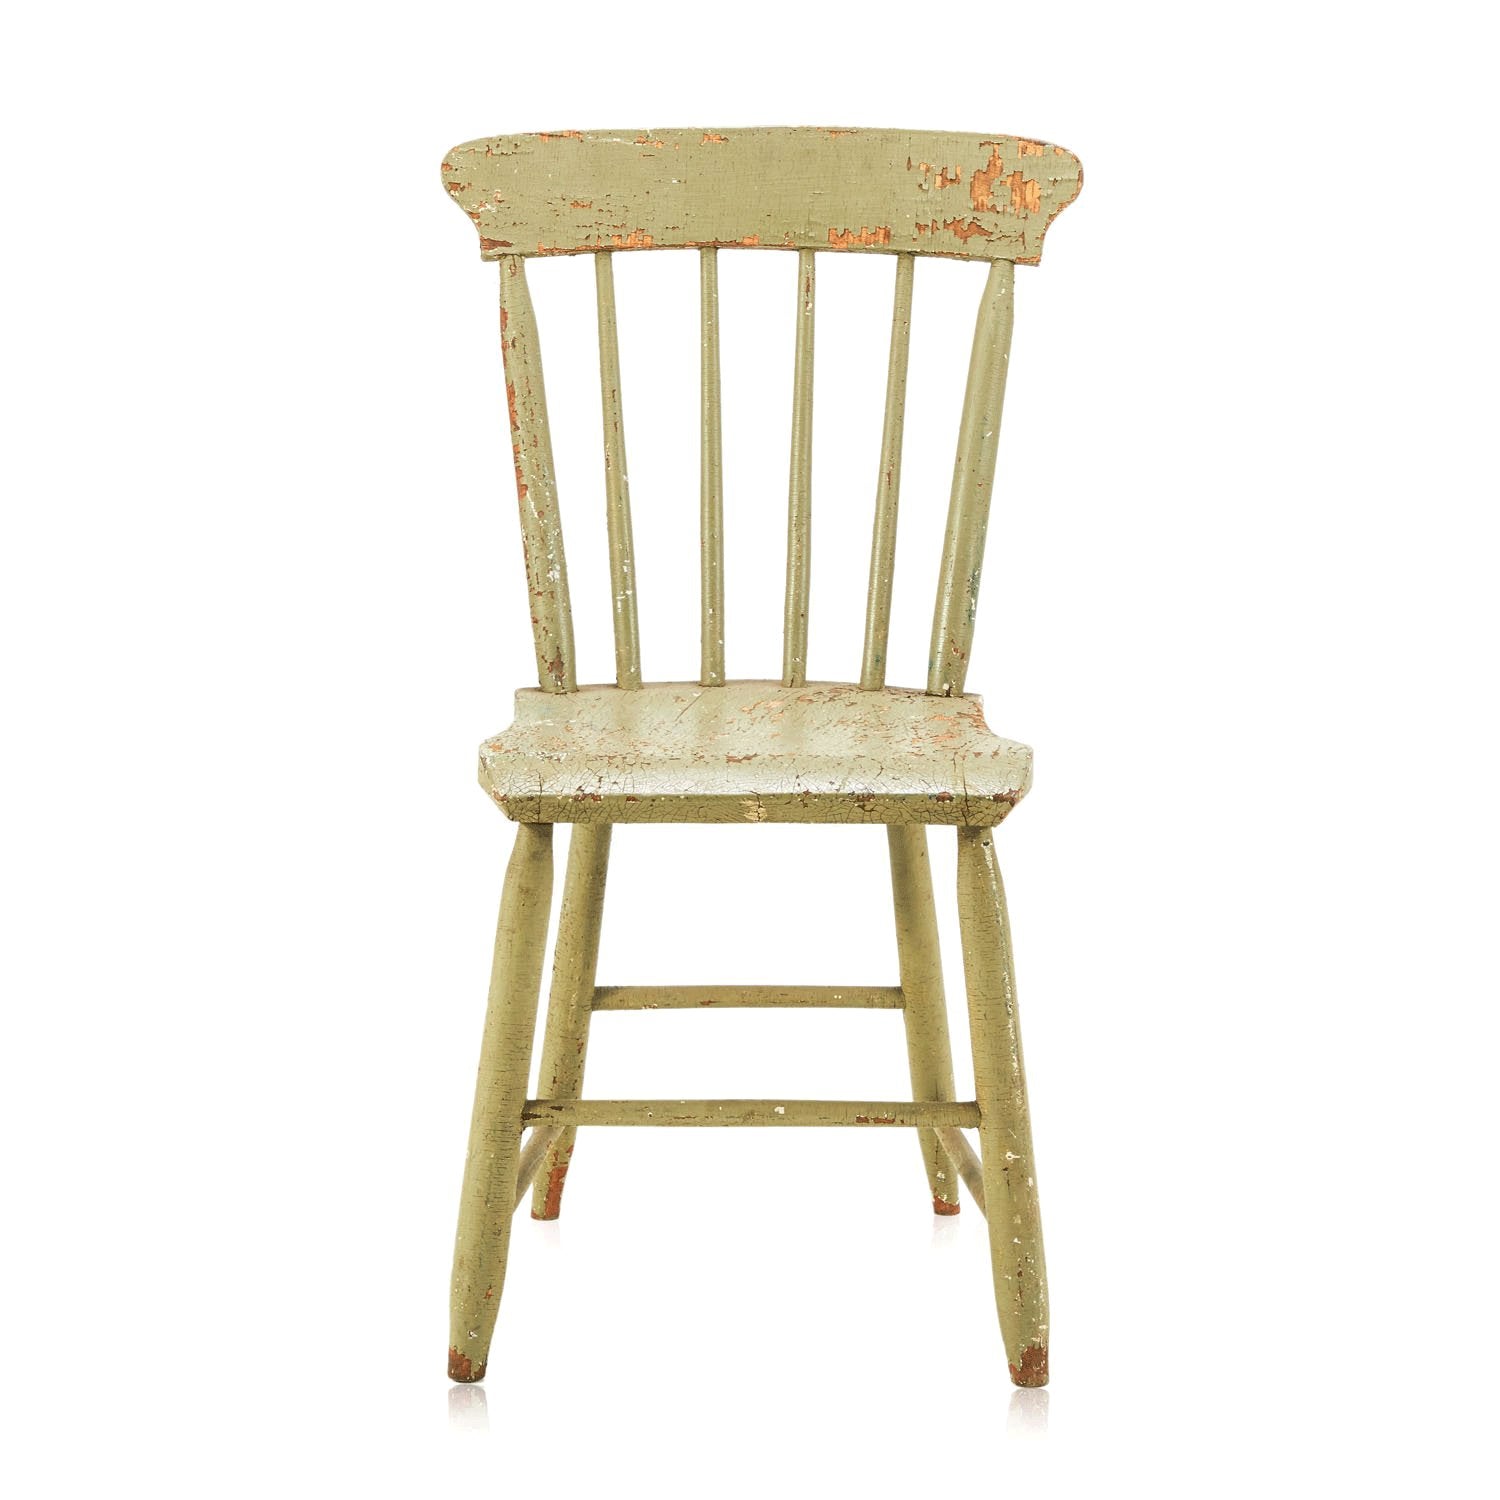 Rustic Farmhouse Dining Chair - Olive Green - Modernica Props